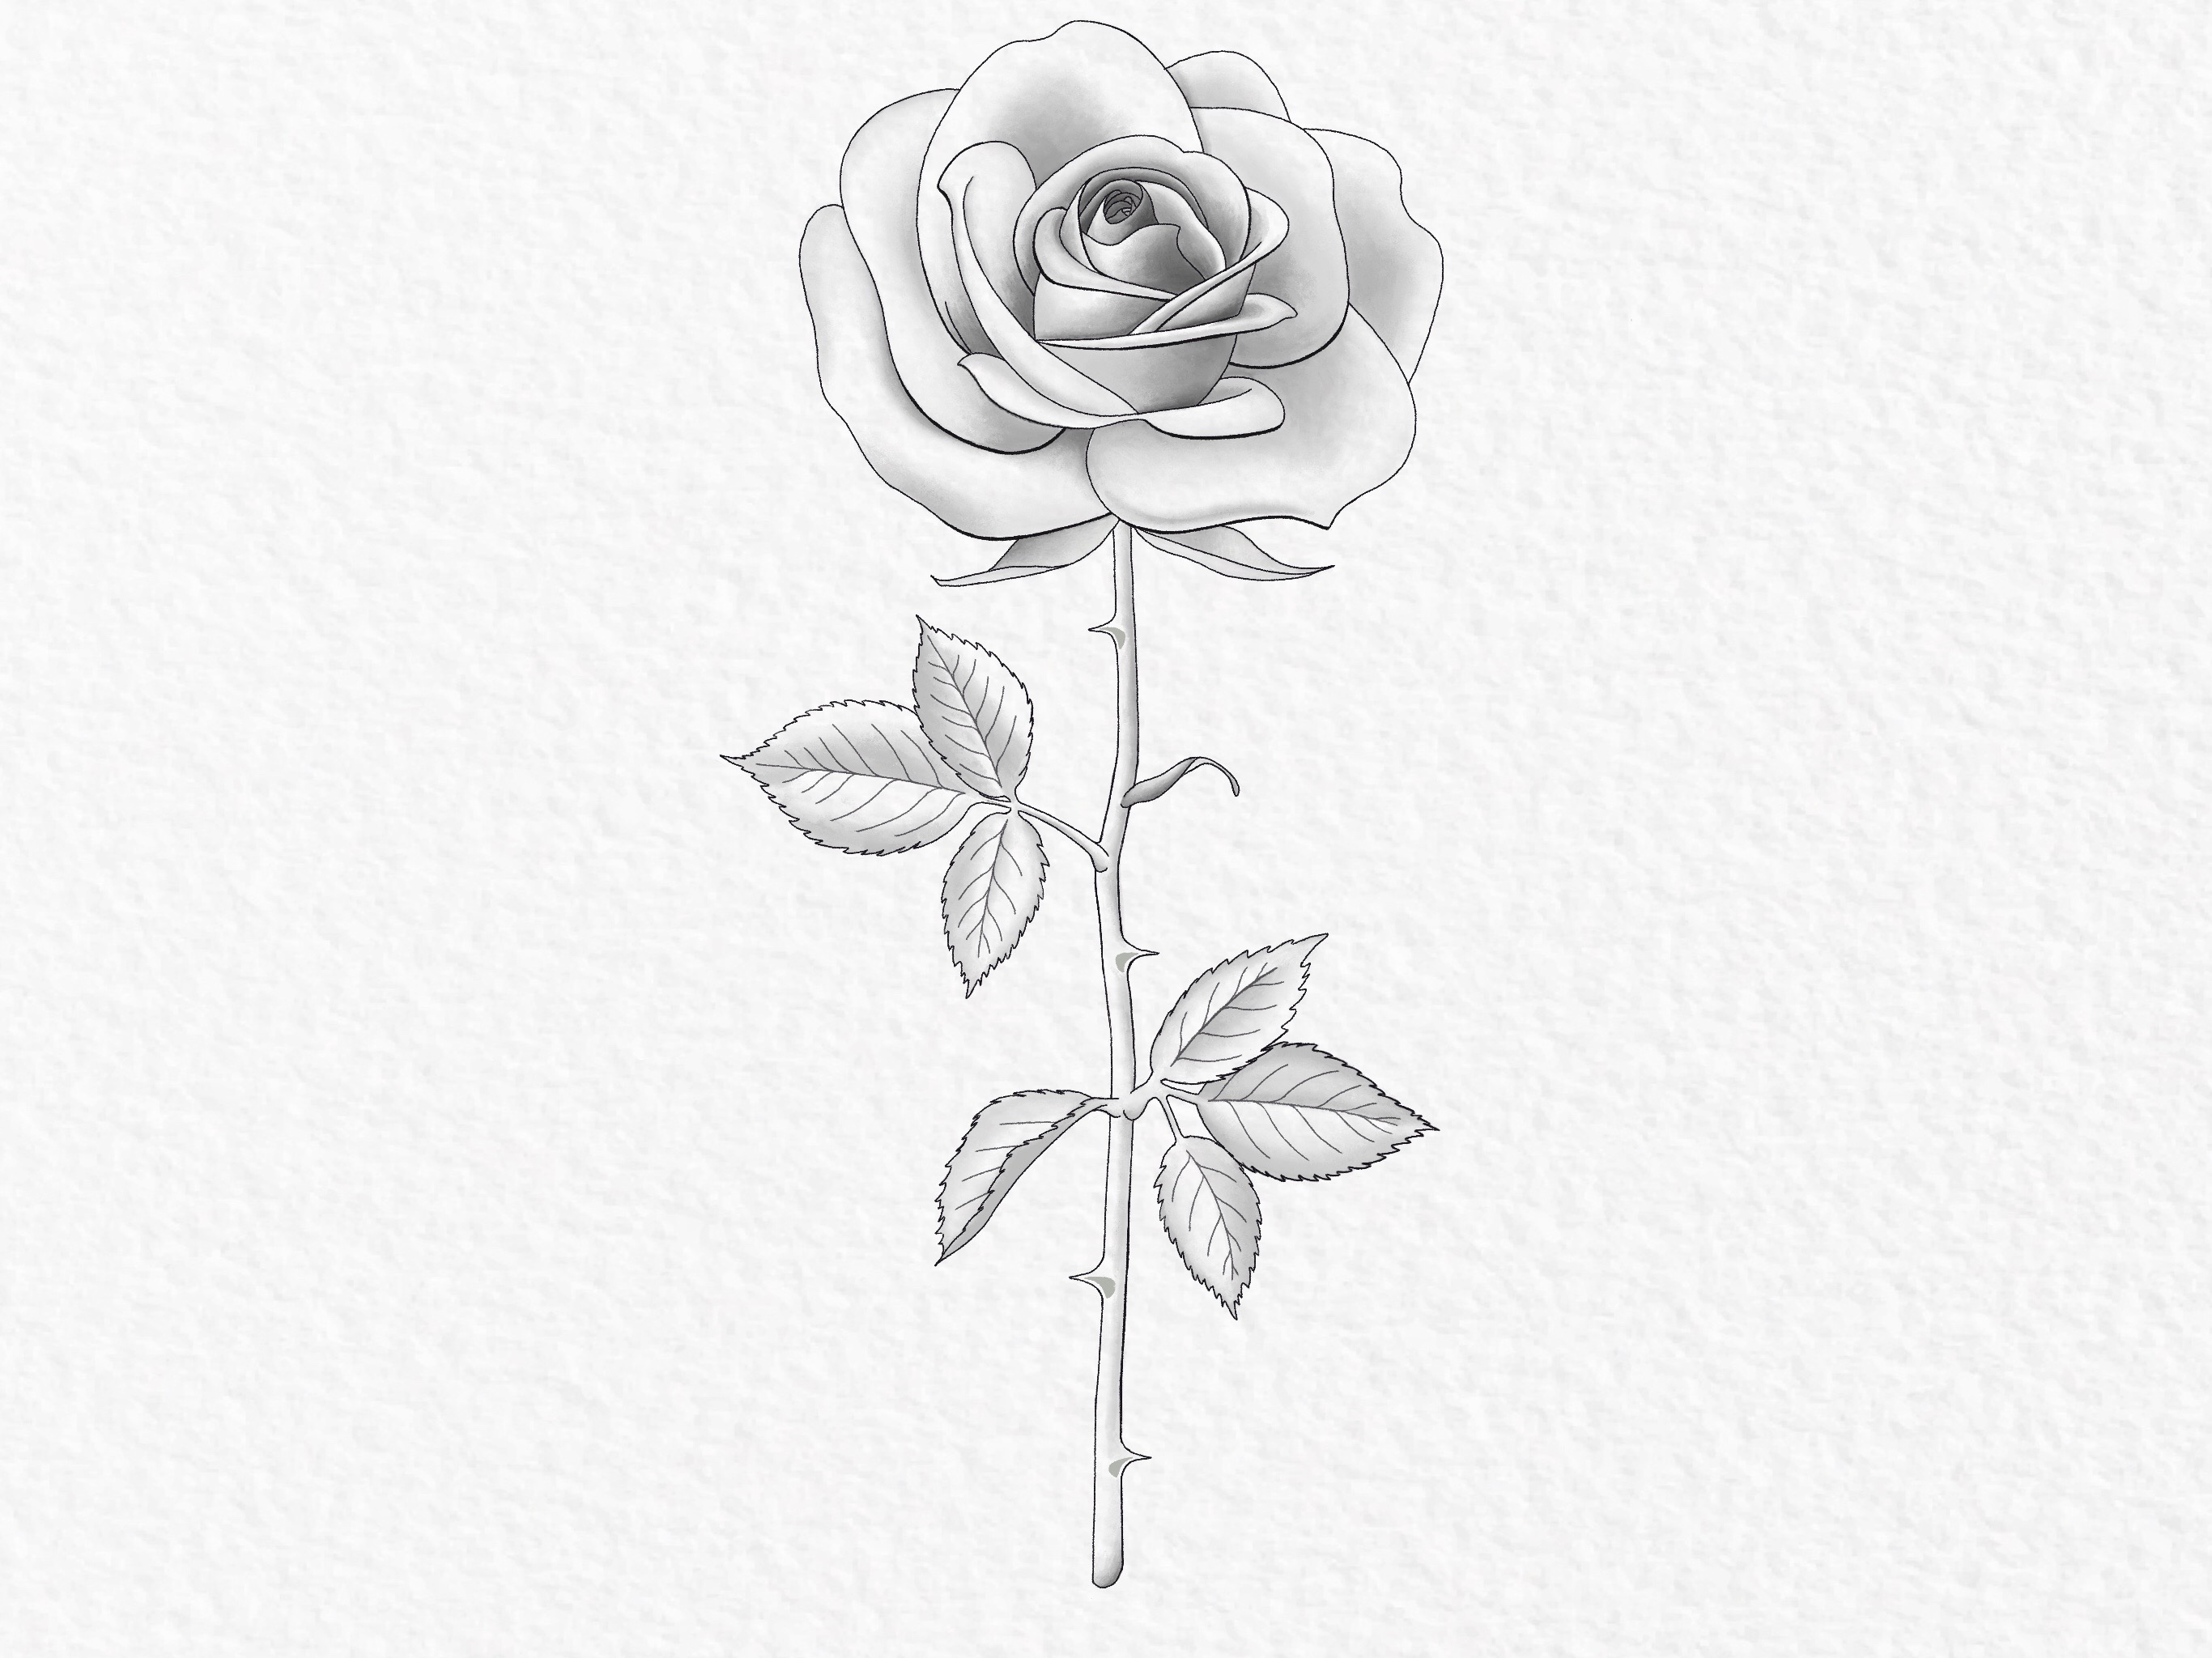 Drawing Roses: Tips and Techniques for Creating Beautiful Botanical Artwork